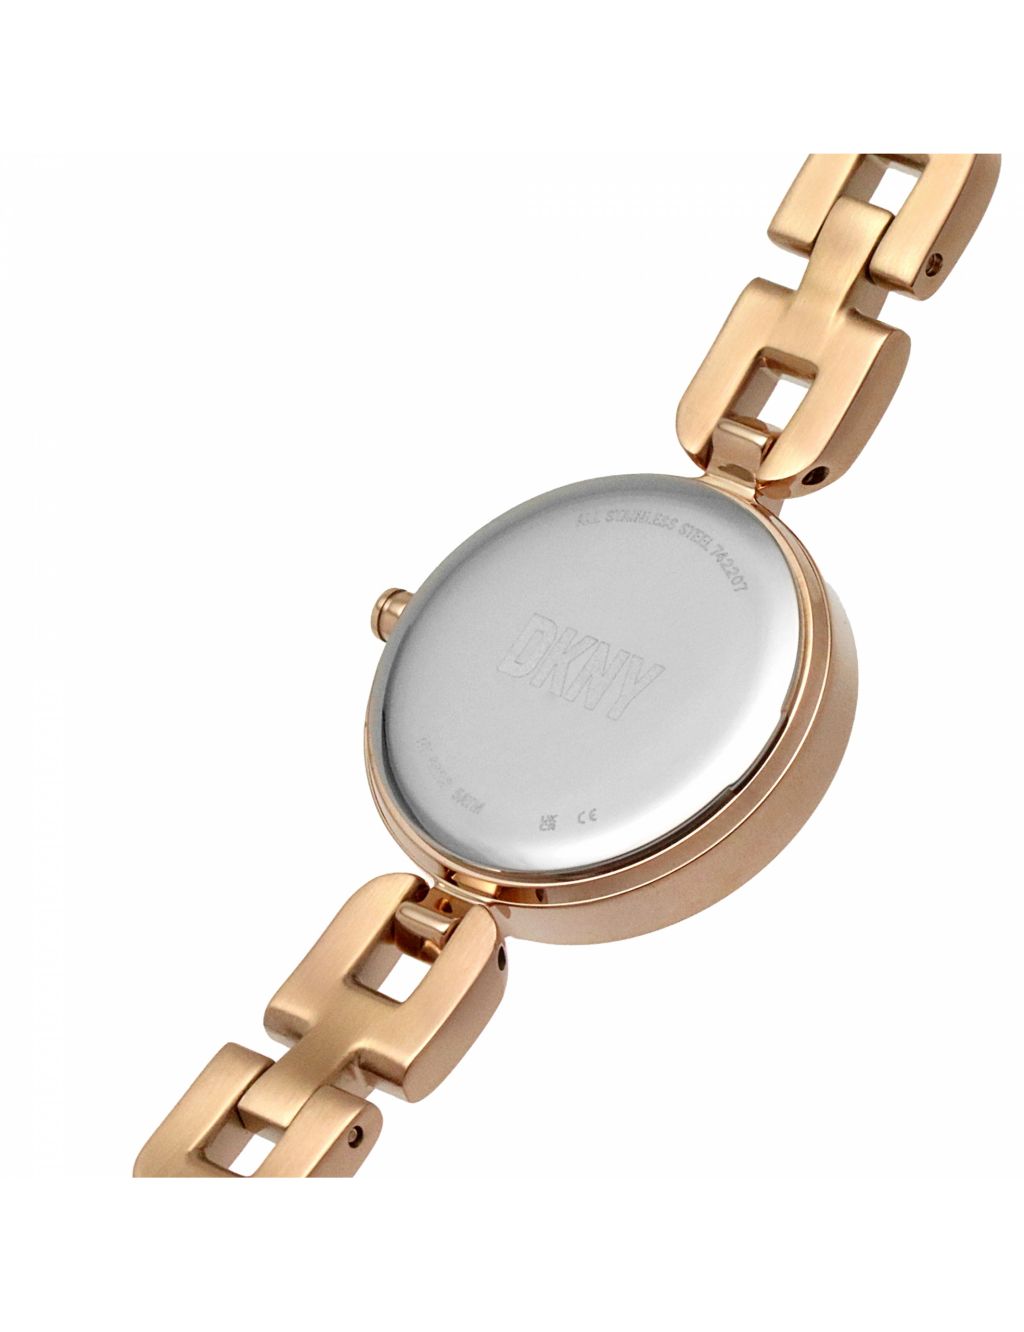 DKNY City Link Stainless Steel Watch image 4